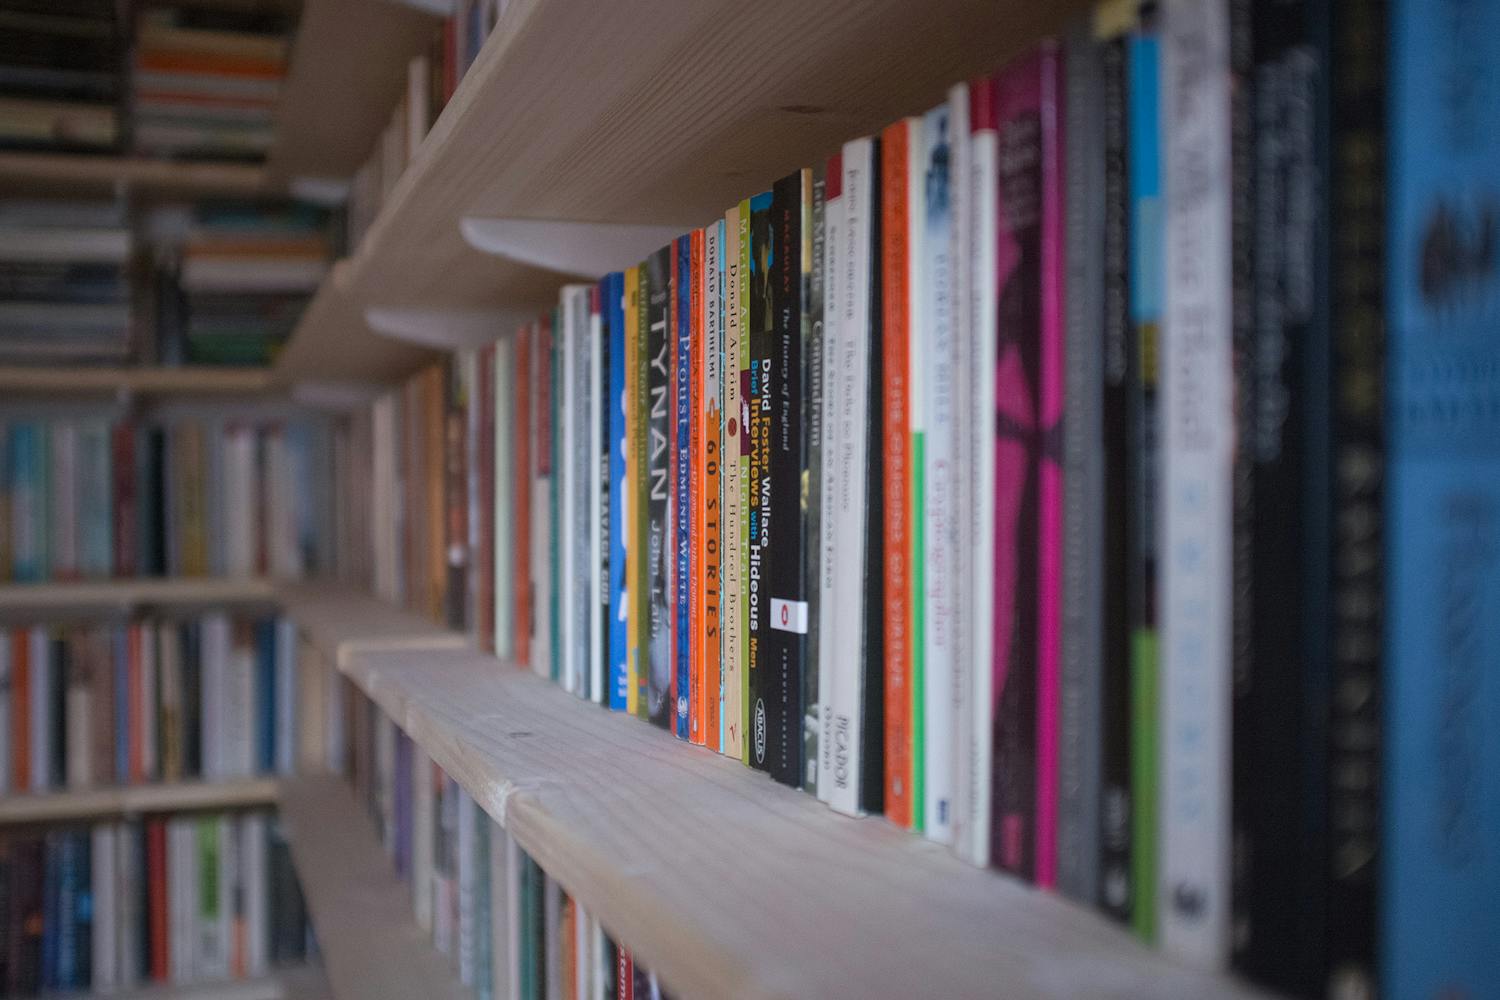 Books cater to people of all interests and lived experiences. (Photo courtesy of Flickr / Andy Lamb, Jan. 4, 2013)